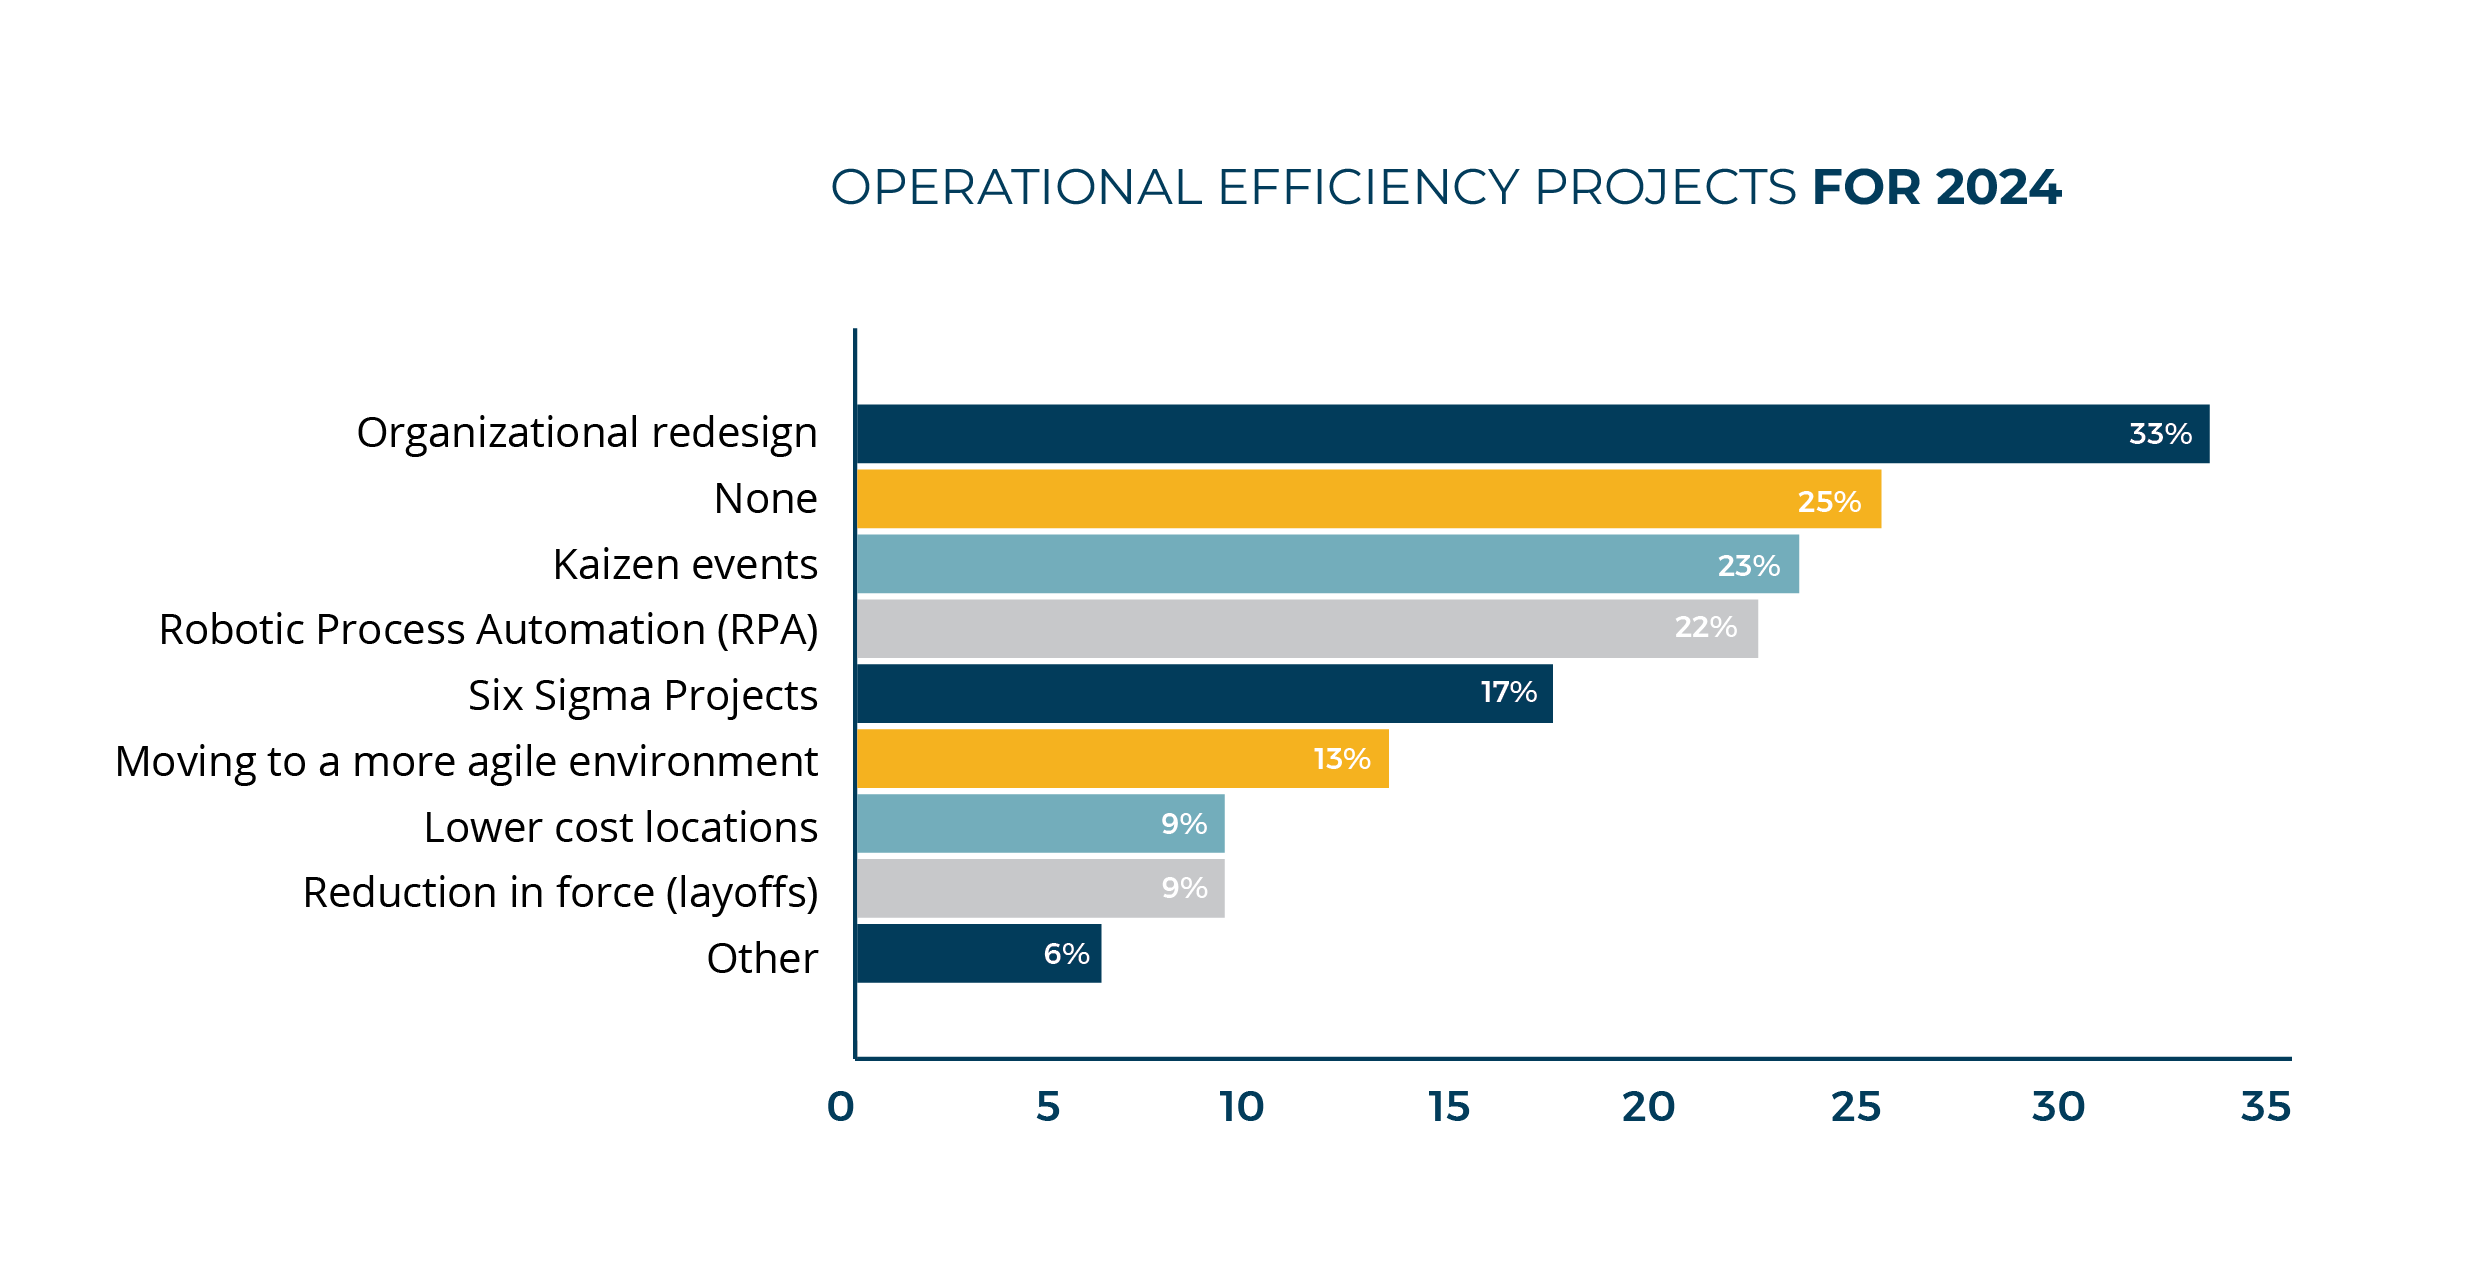 Operational Efficiency Projects for 2024